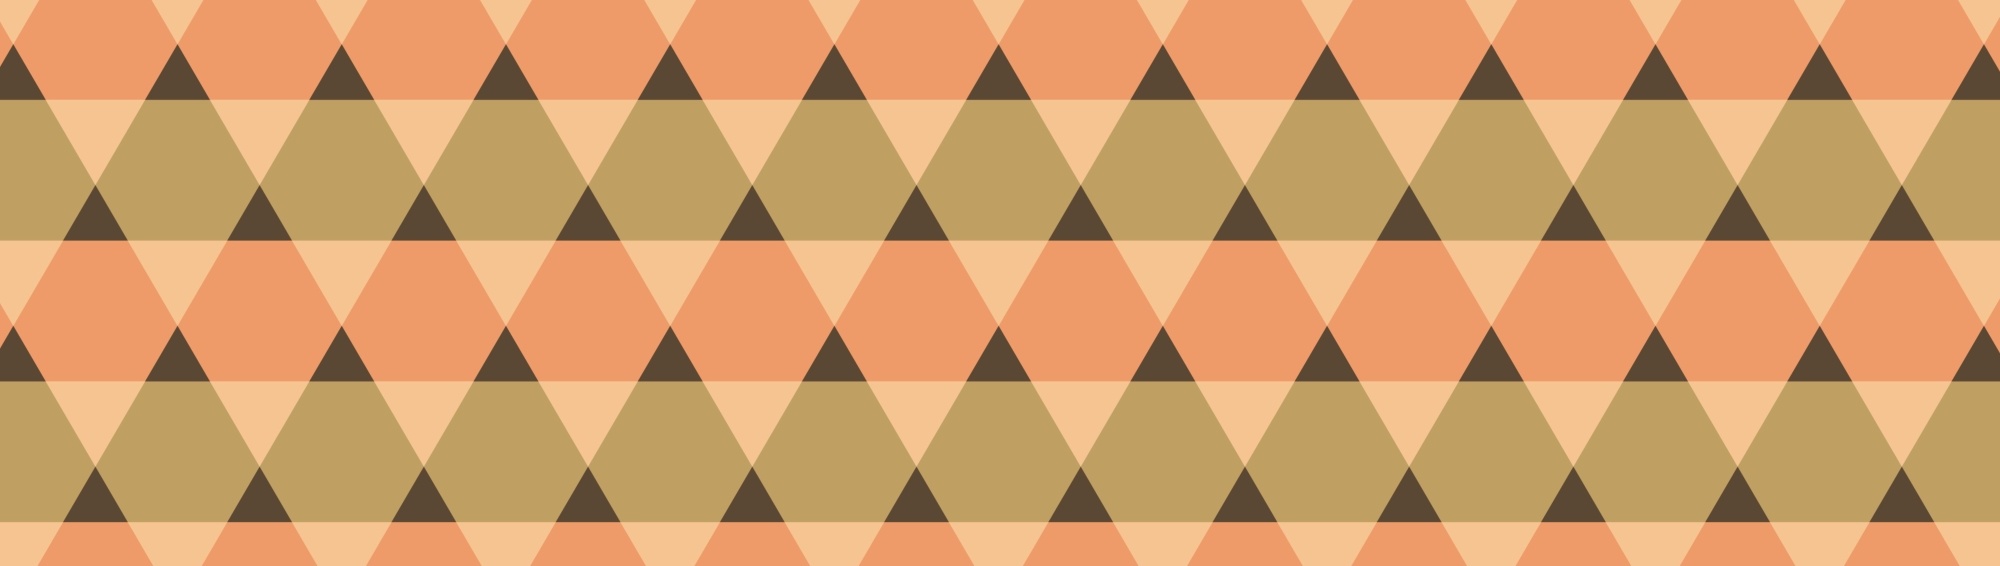 Brown Triangles Pattern